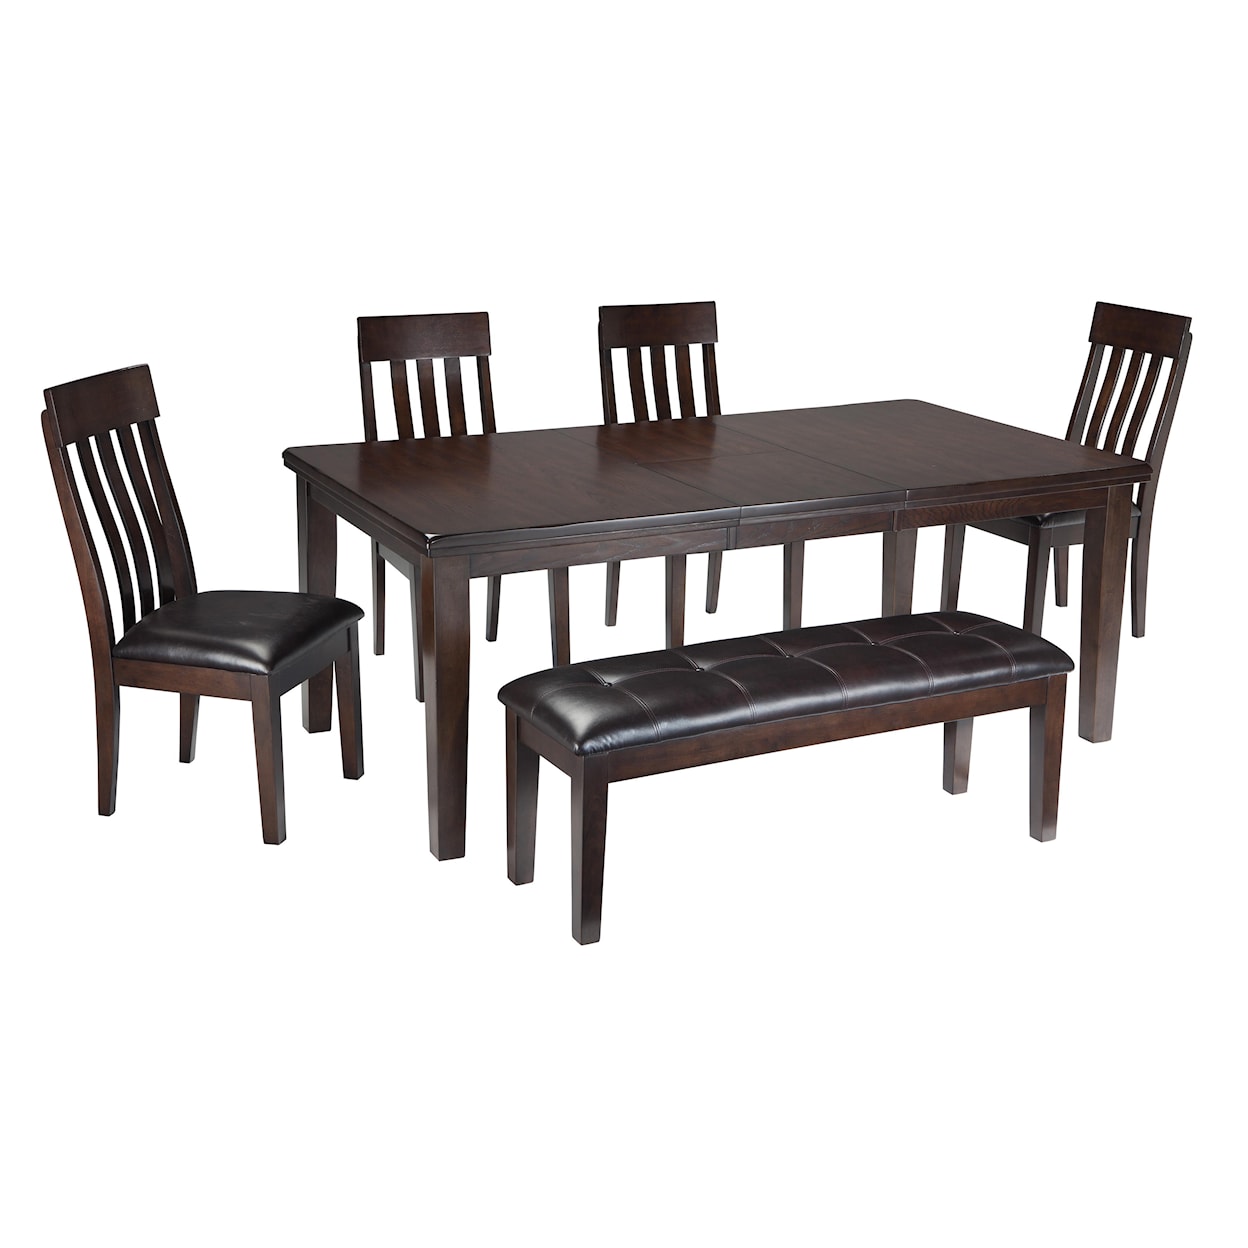 Ashley Furniture Signature Design Haddigan 6-Piece Table, Chair and Bench Set